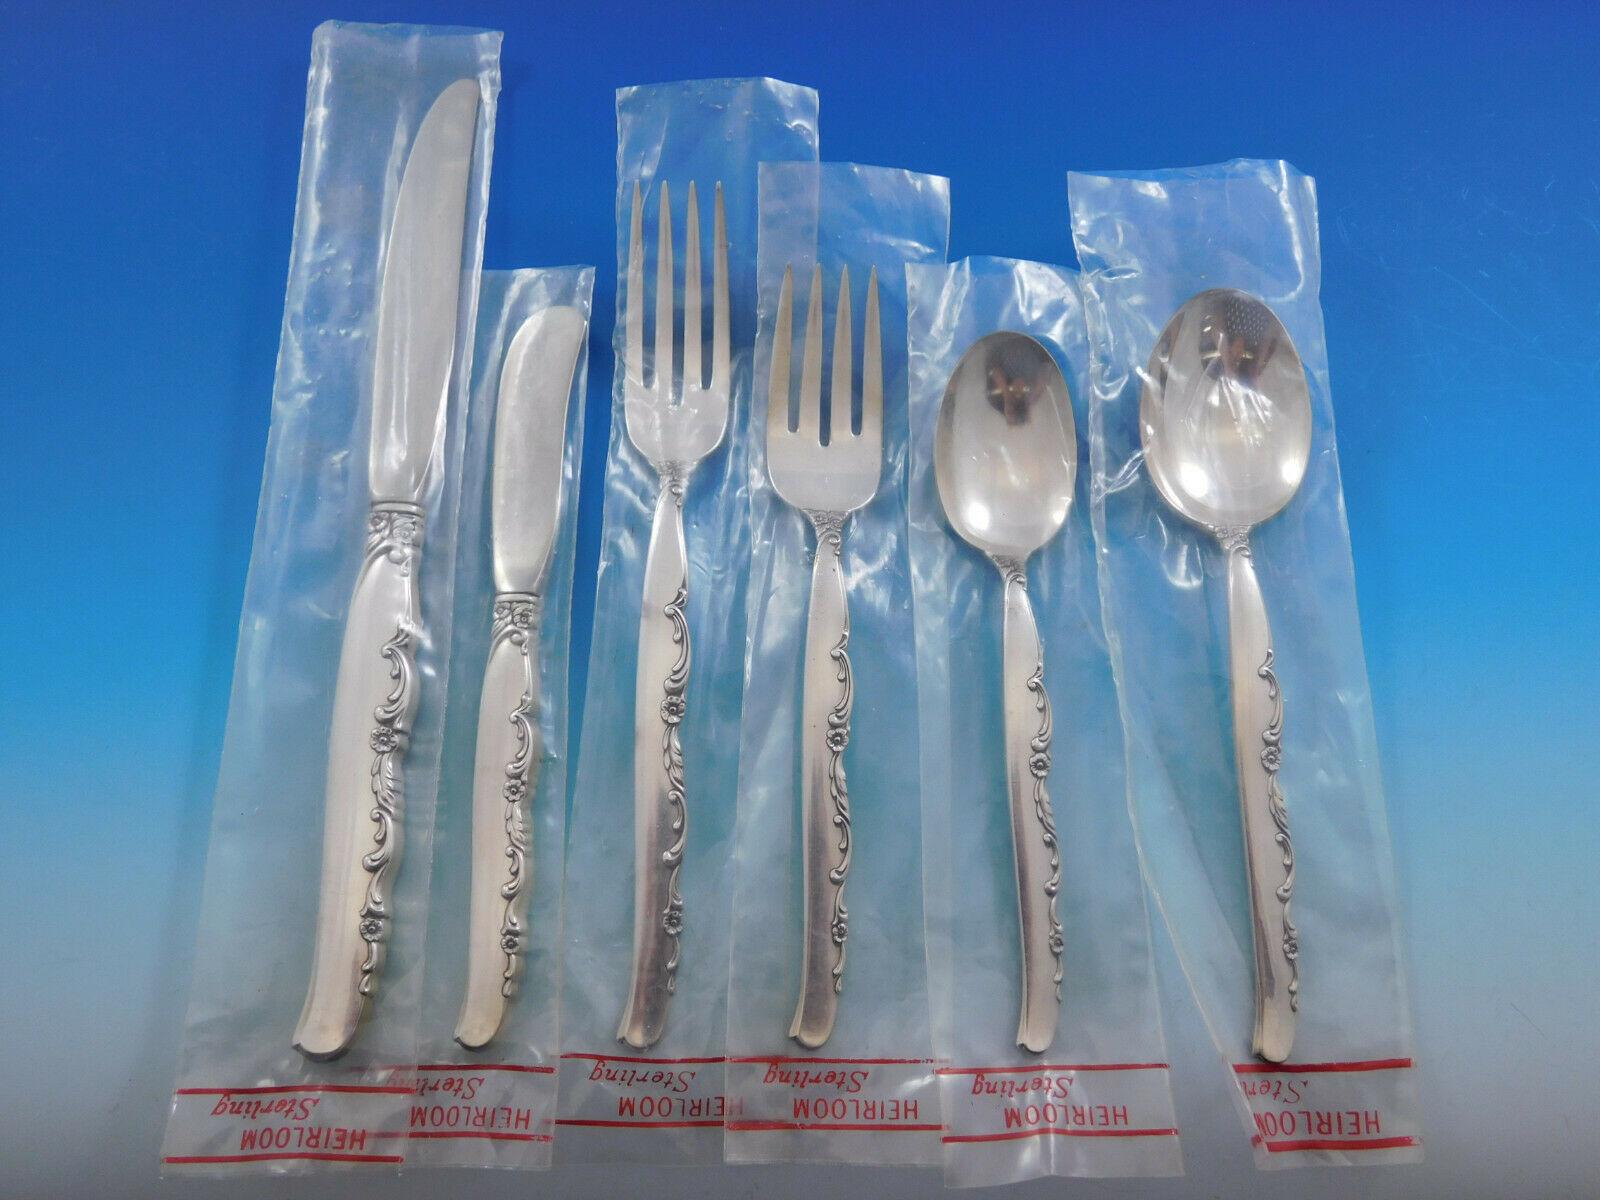 Unused flower Lane by Oneida sterling silver flatware set, 79 pieces. This set includes:

12 knives, 9 1/8